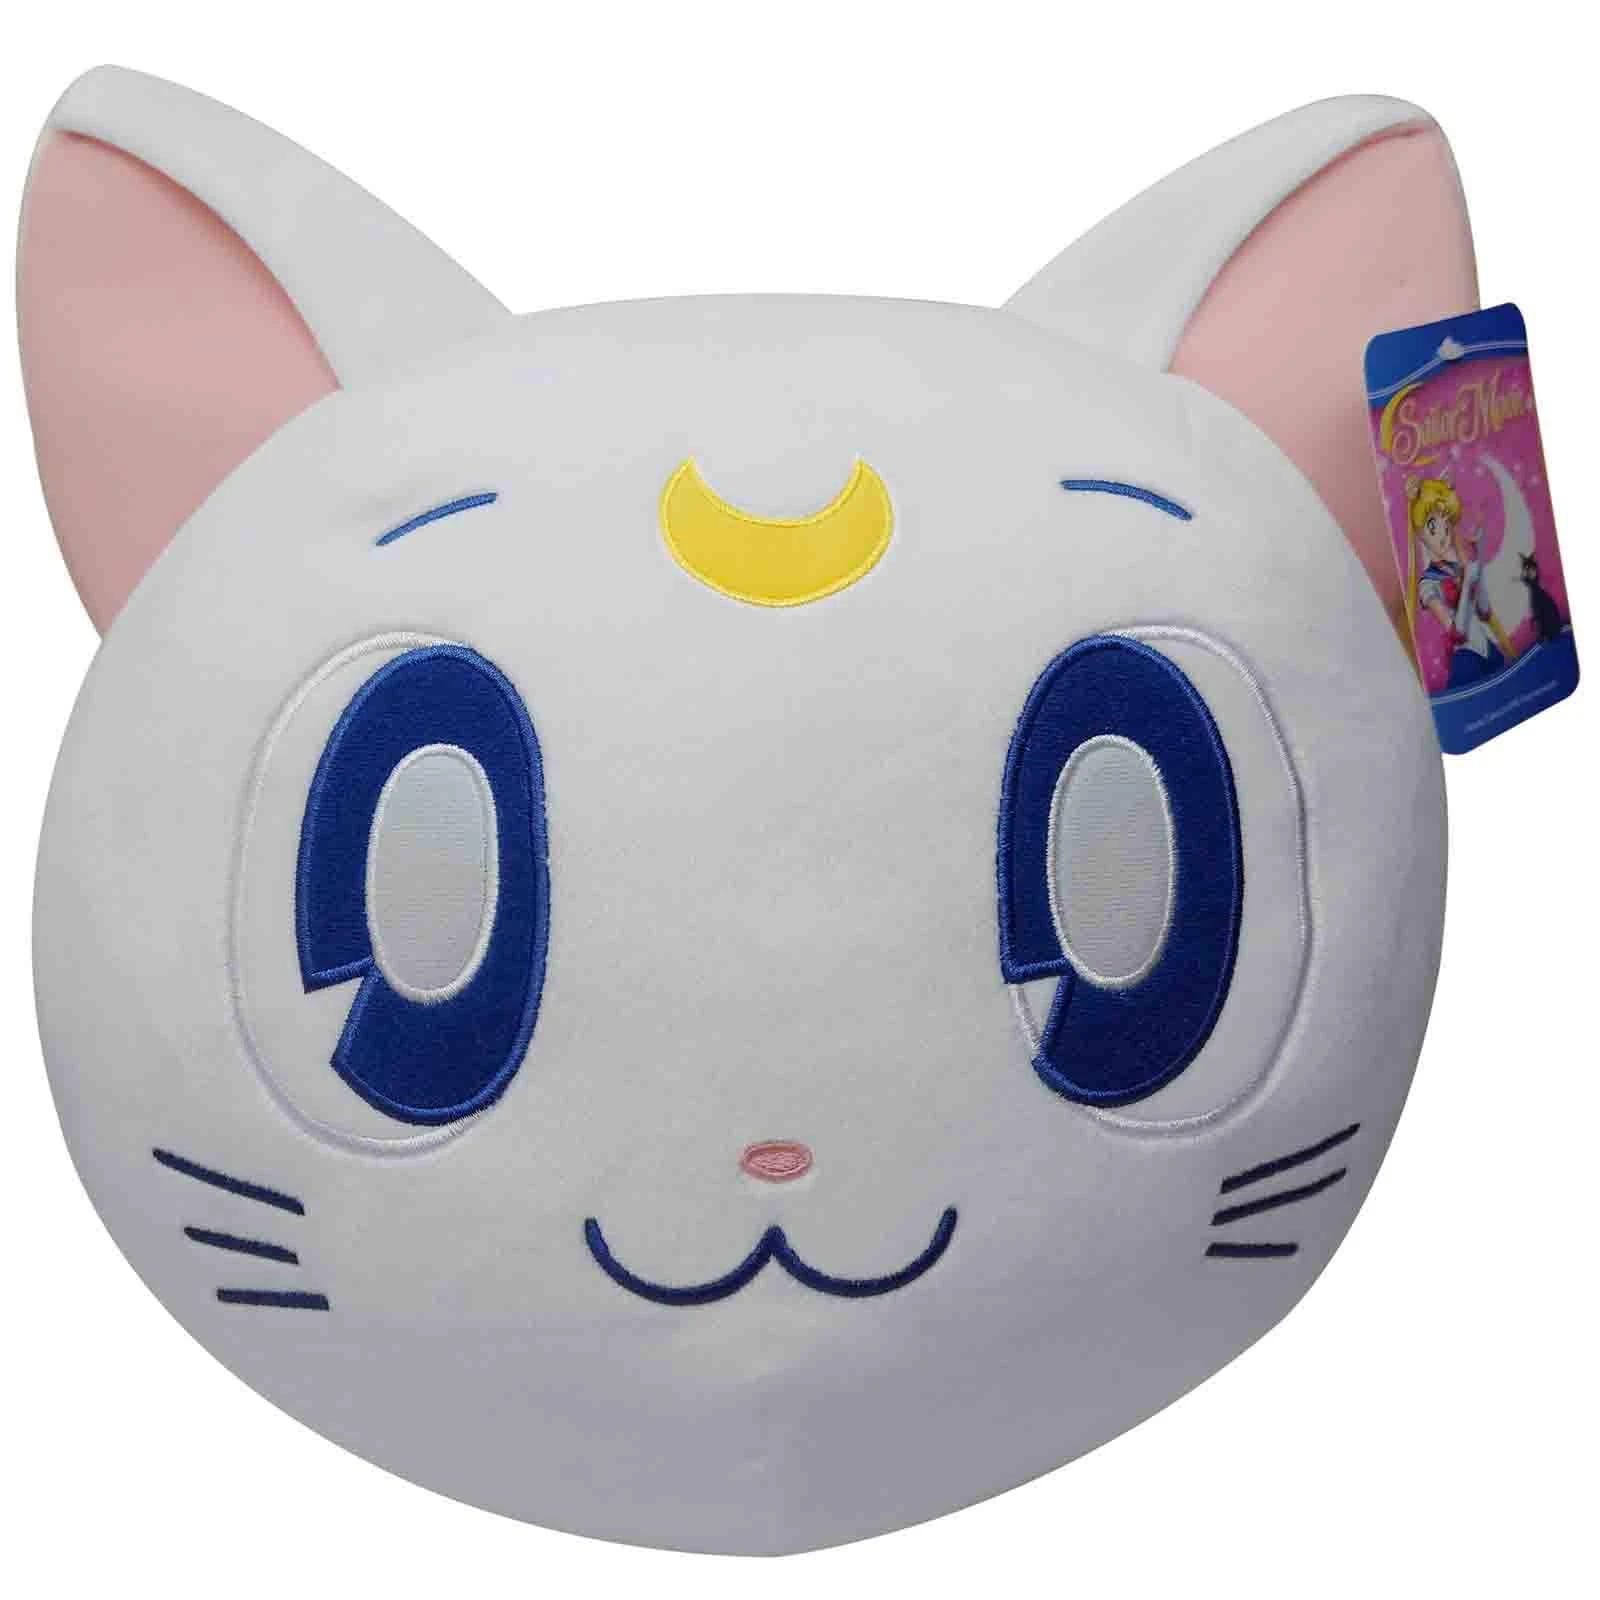 Officially Licensed Sailor Moon Artemis Mochi Plush Stuffed Animal - Cuddly and Collectible | Image